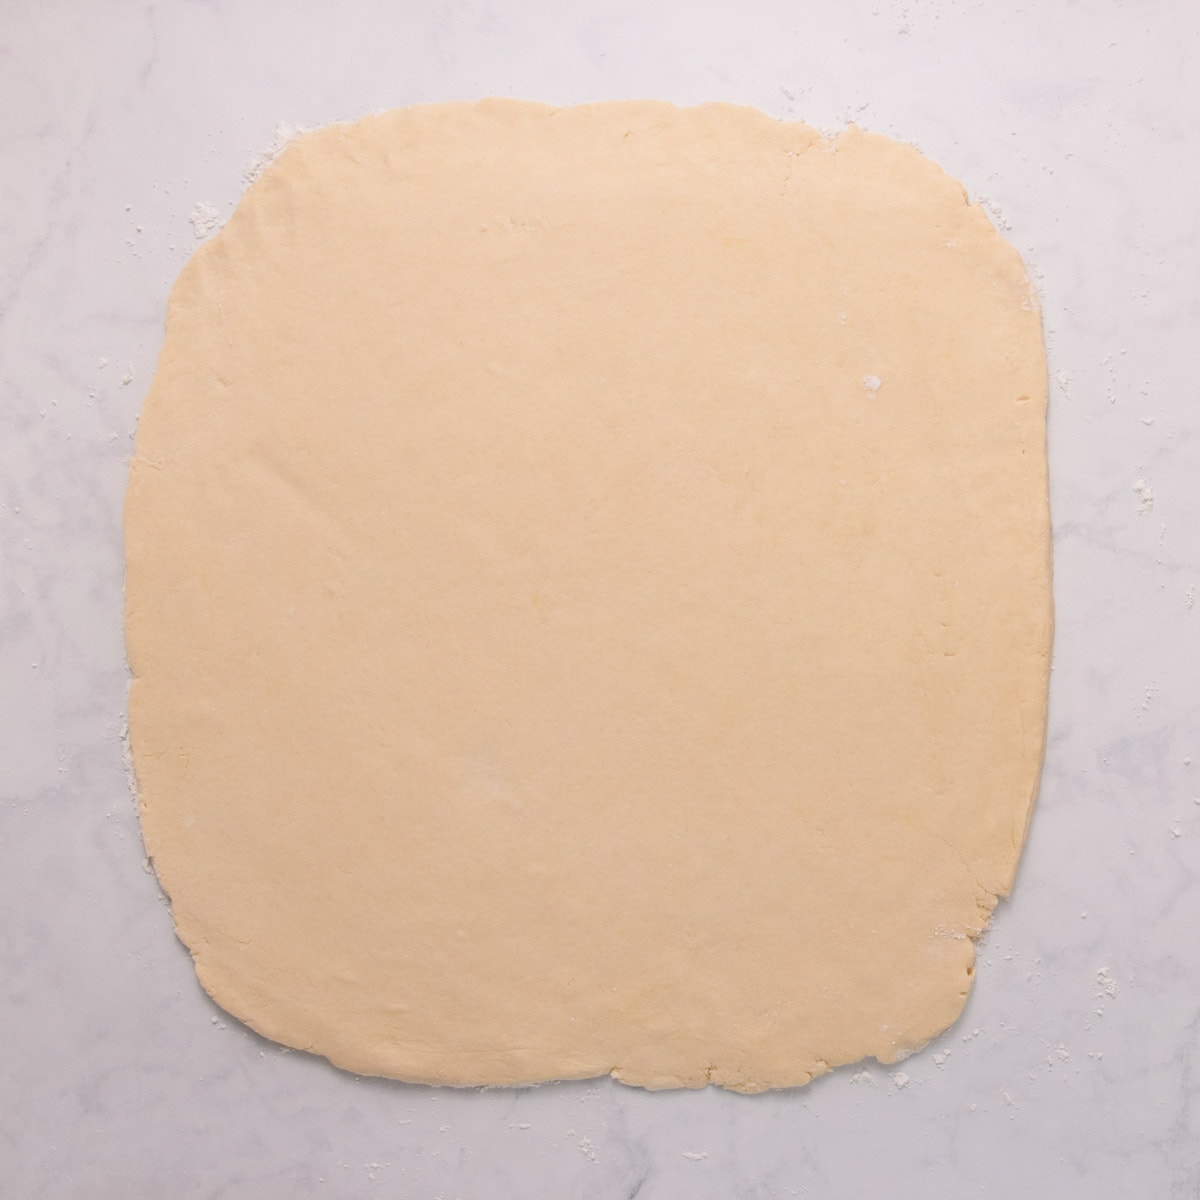 The dough rolled out into a large square.